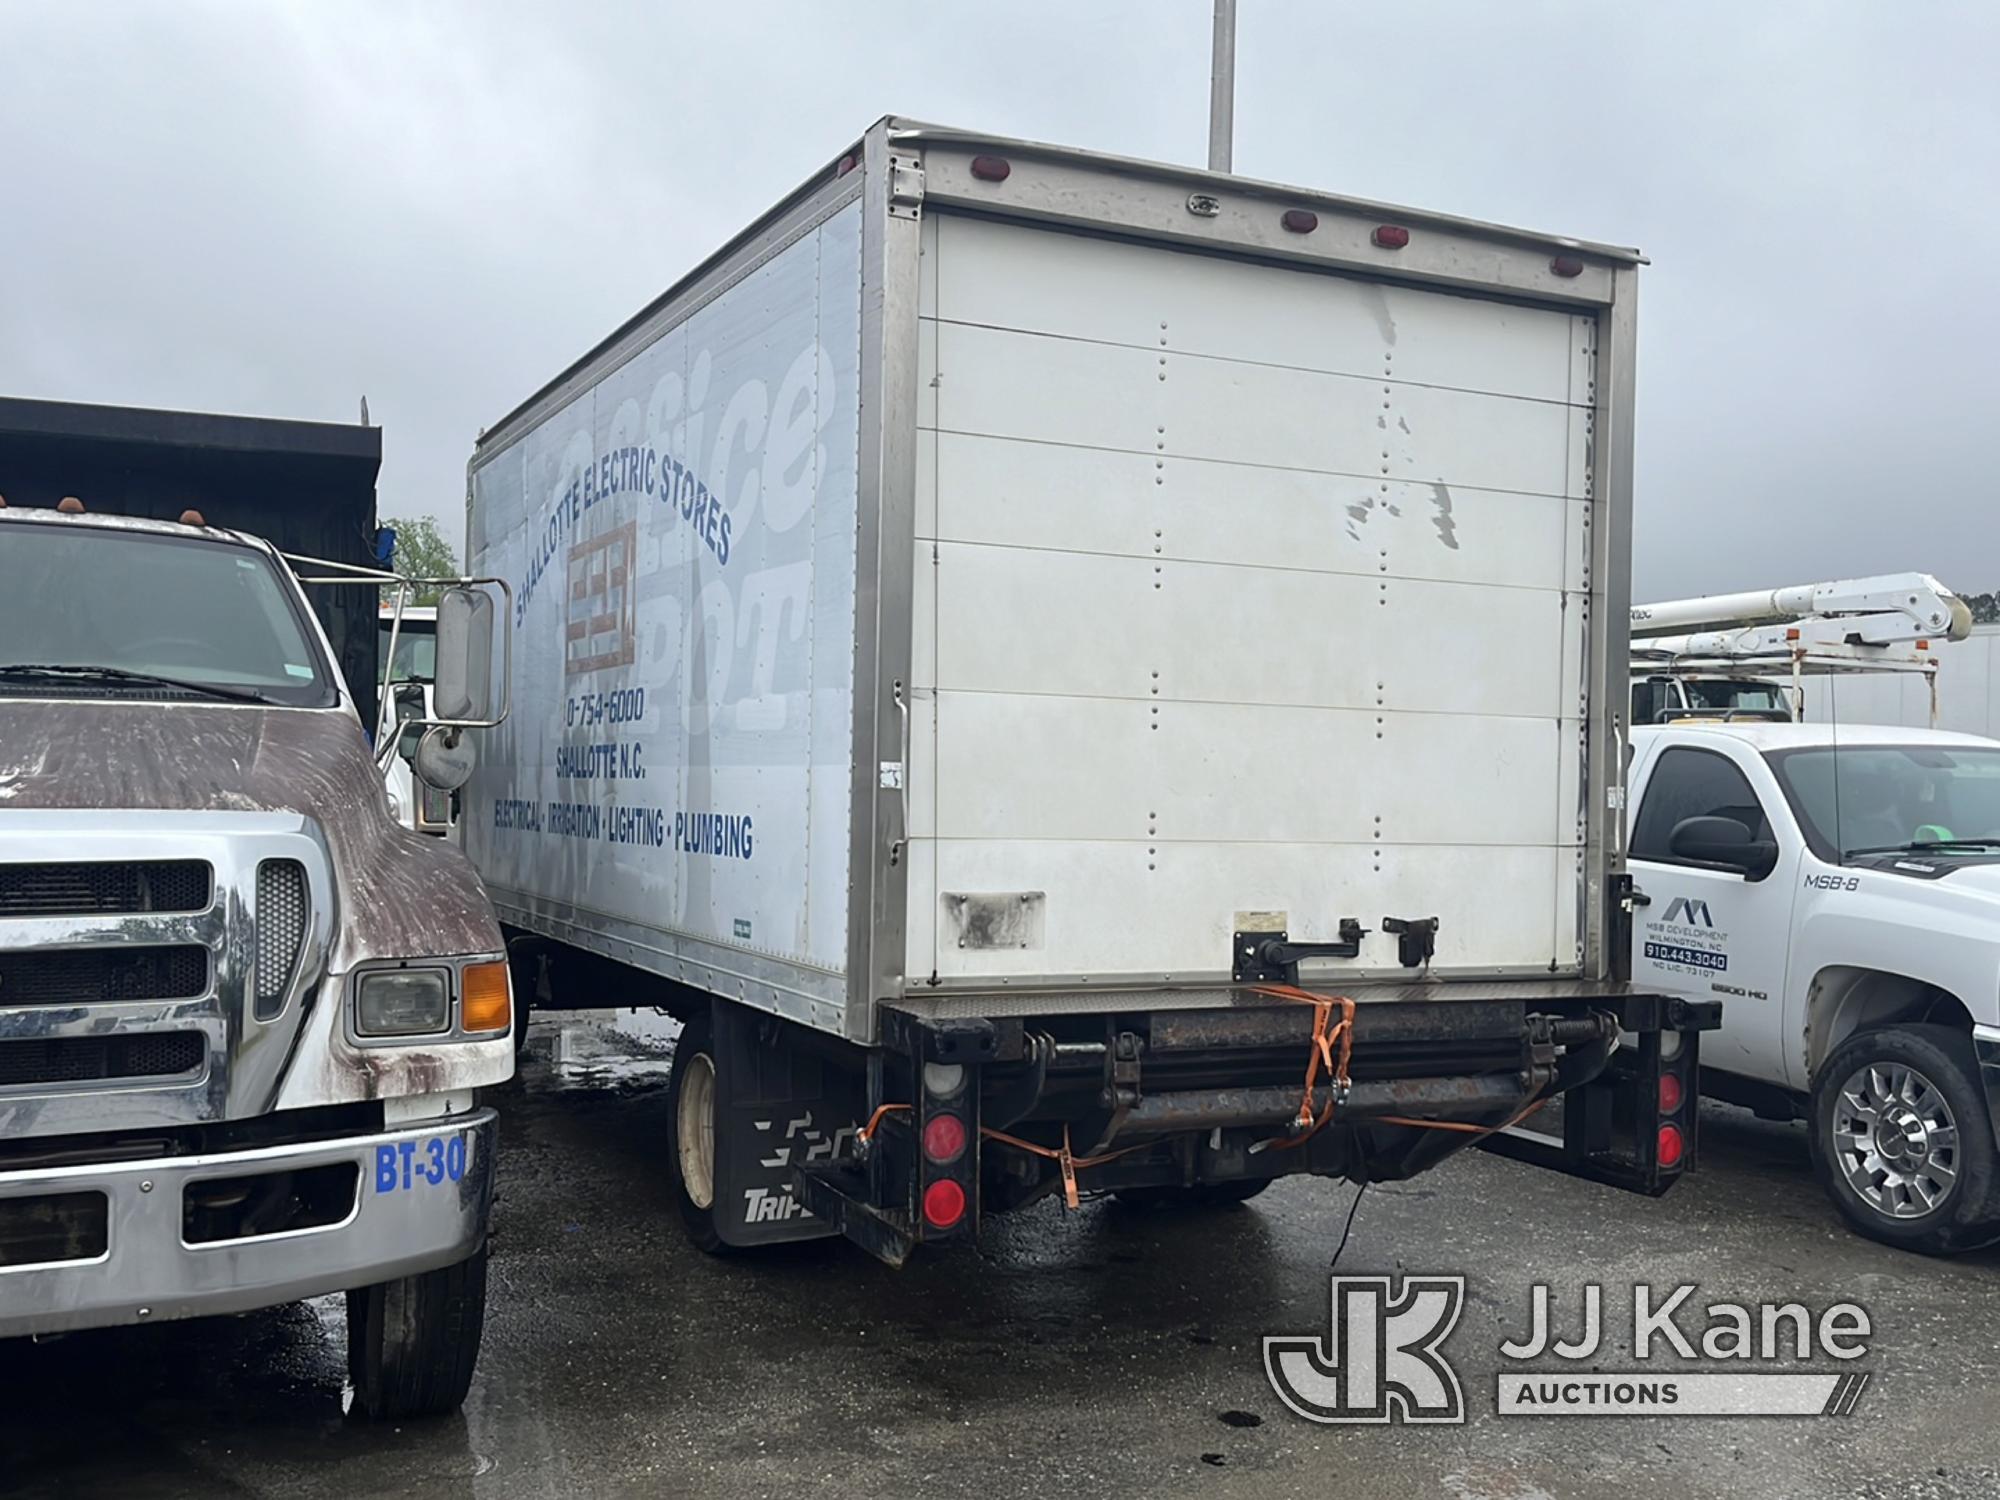 (Supply, NC) 2002 Isuzu NQR Van Body Truck Runs) (Does Not Move, Transmission Issues, Condition Unkn